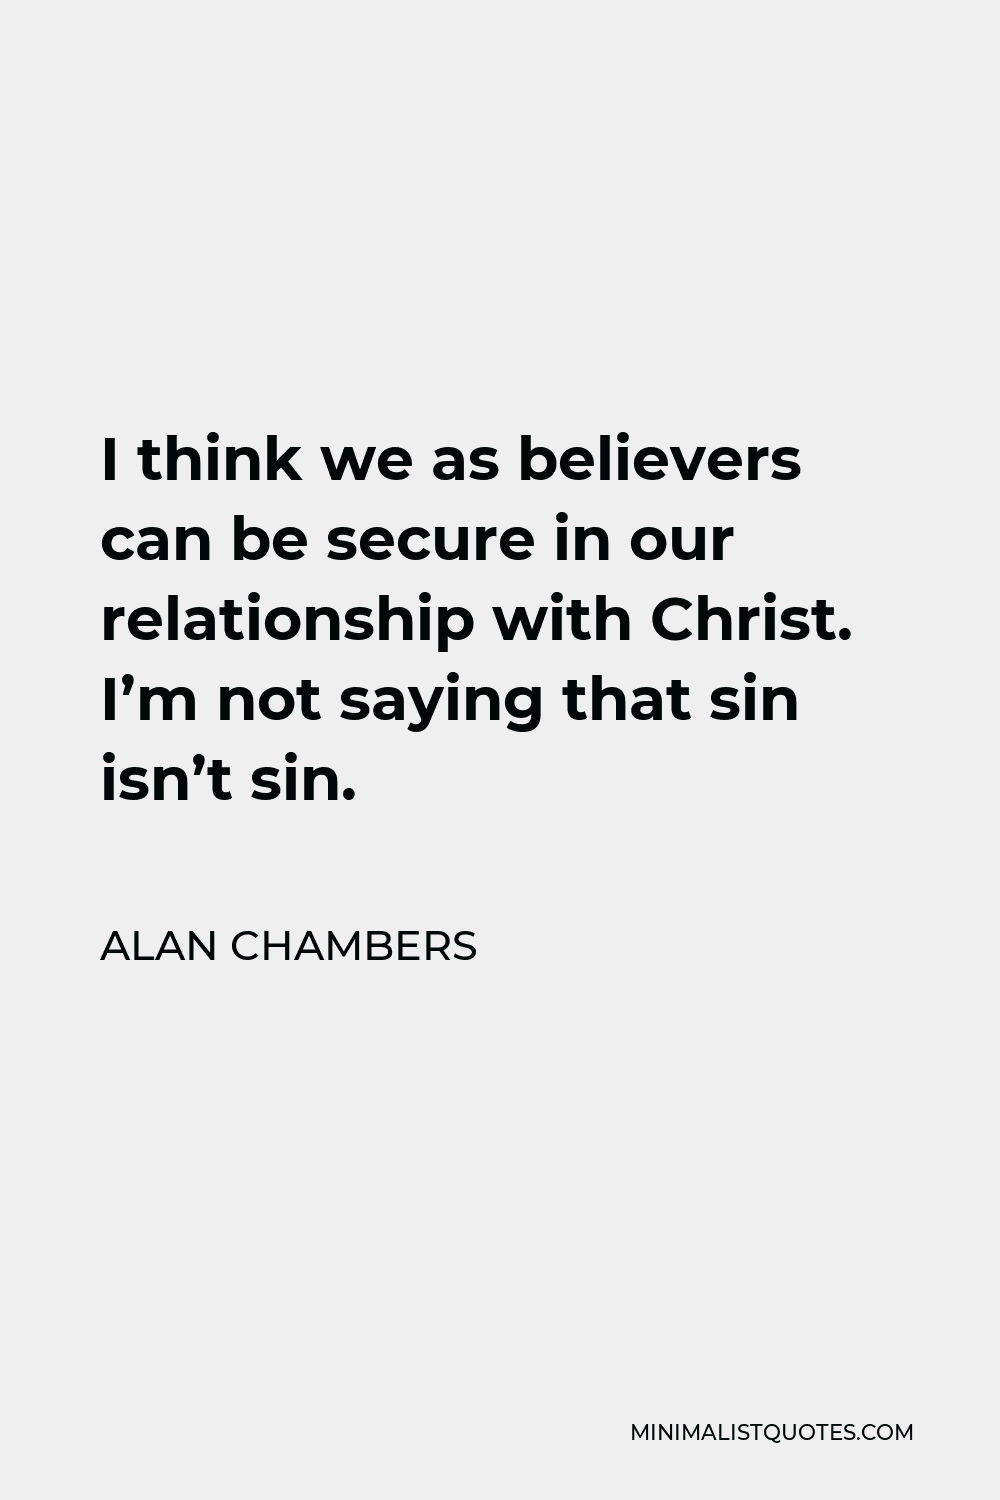 Alan Chambers Quote - I think we as believers can be secure in our relationship with Christ. I’m not saying that sin isn’t sin.